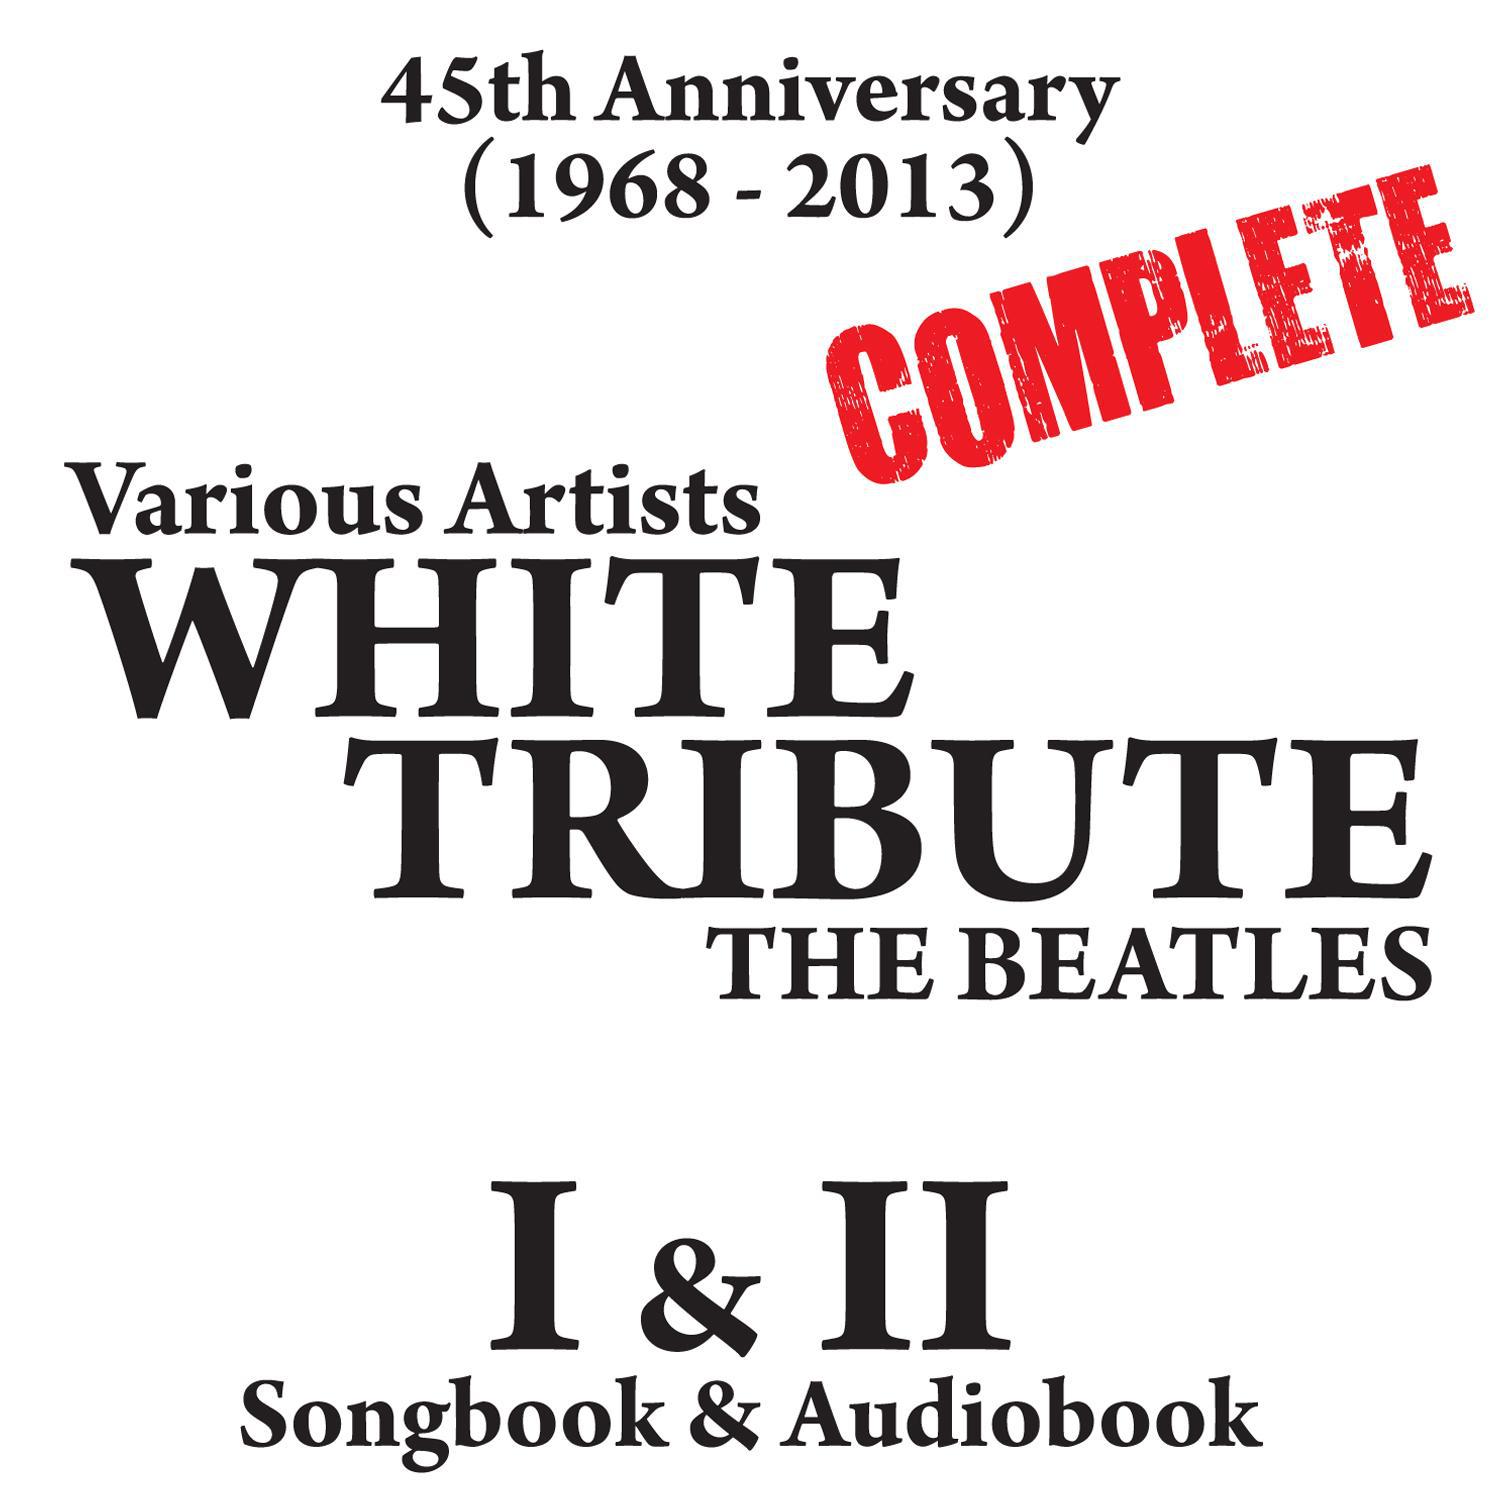 The Complete White Album Tribute (Part One & Two) 45th Anniversary [1968 - 2013] - Songbook & Audiobook